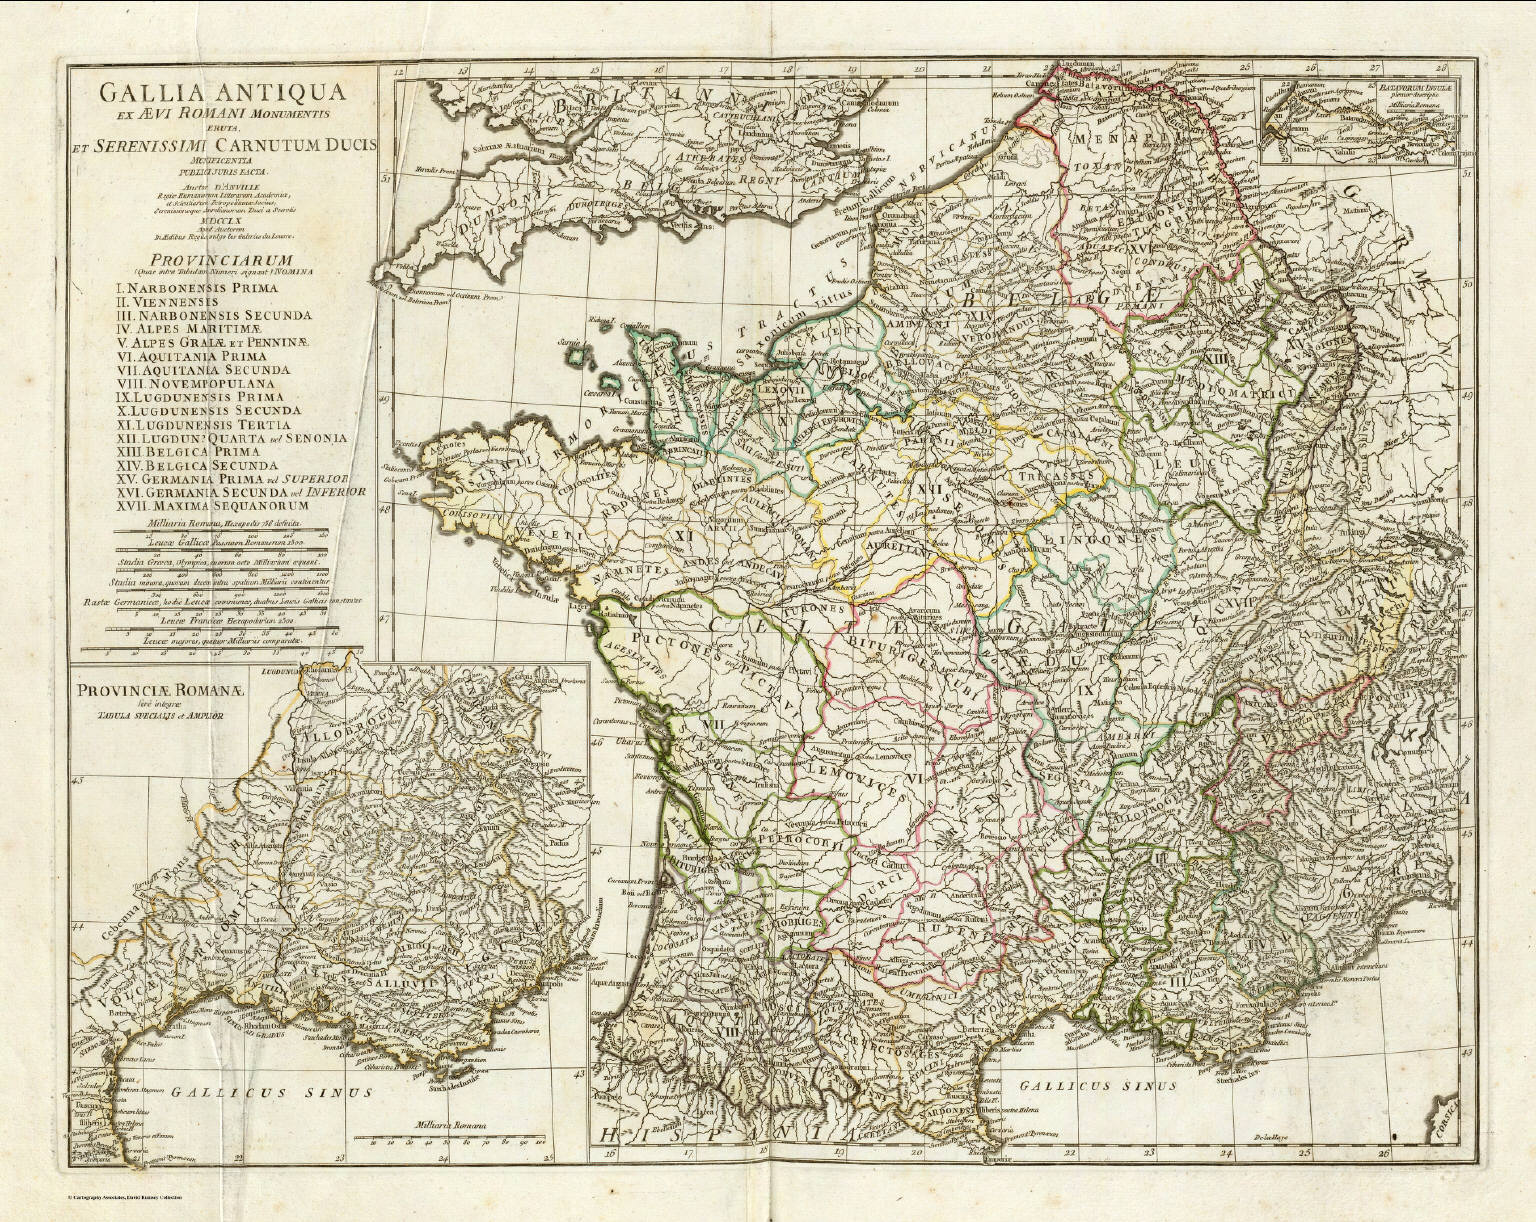 Gallia Antiqua. - David Rumsey Historical Map Collection